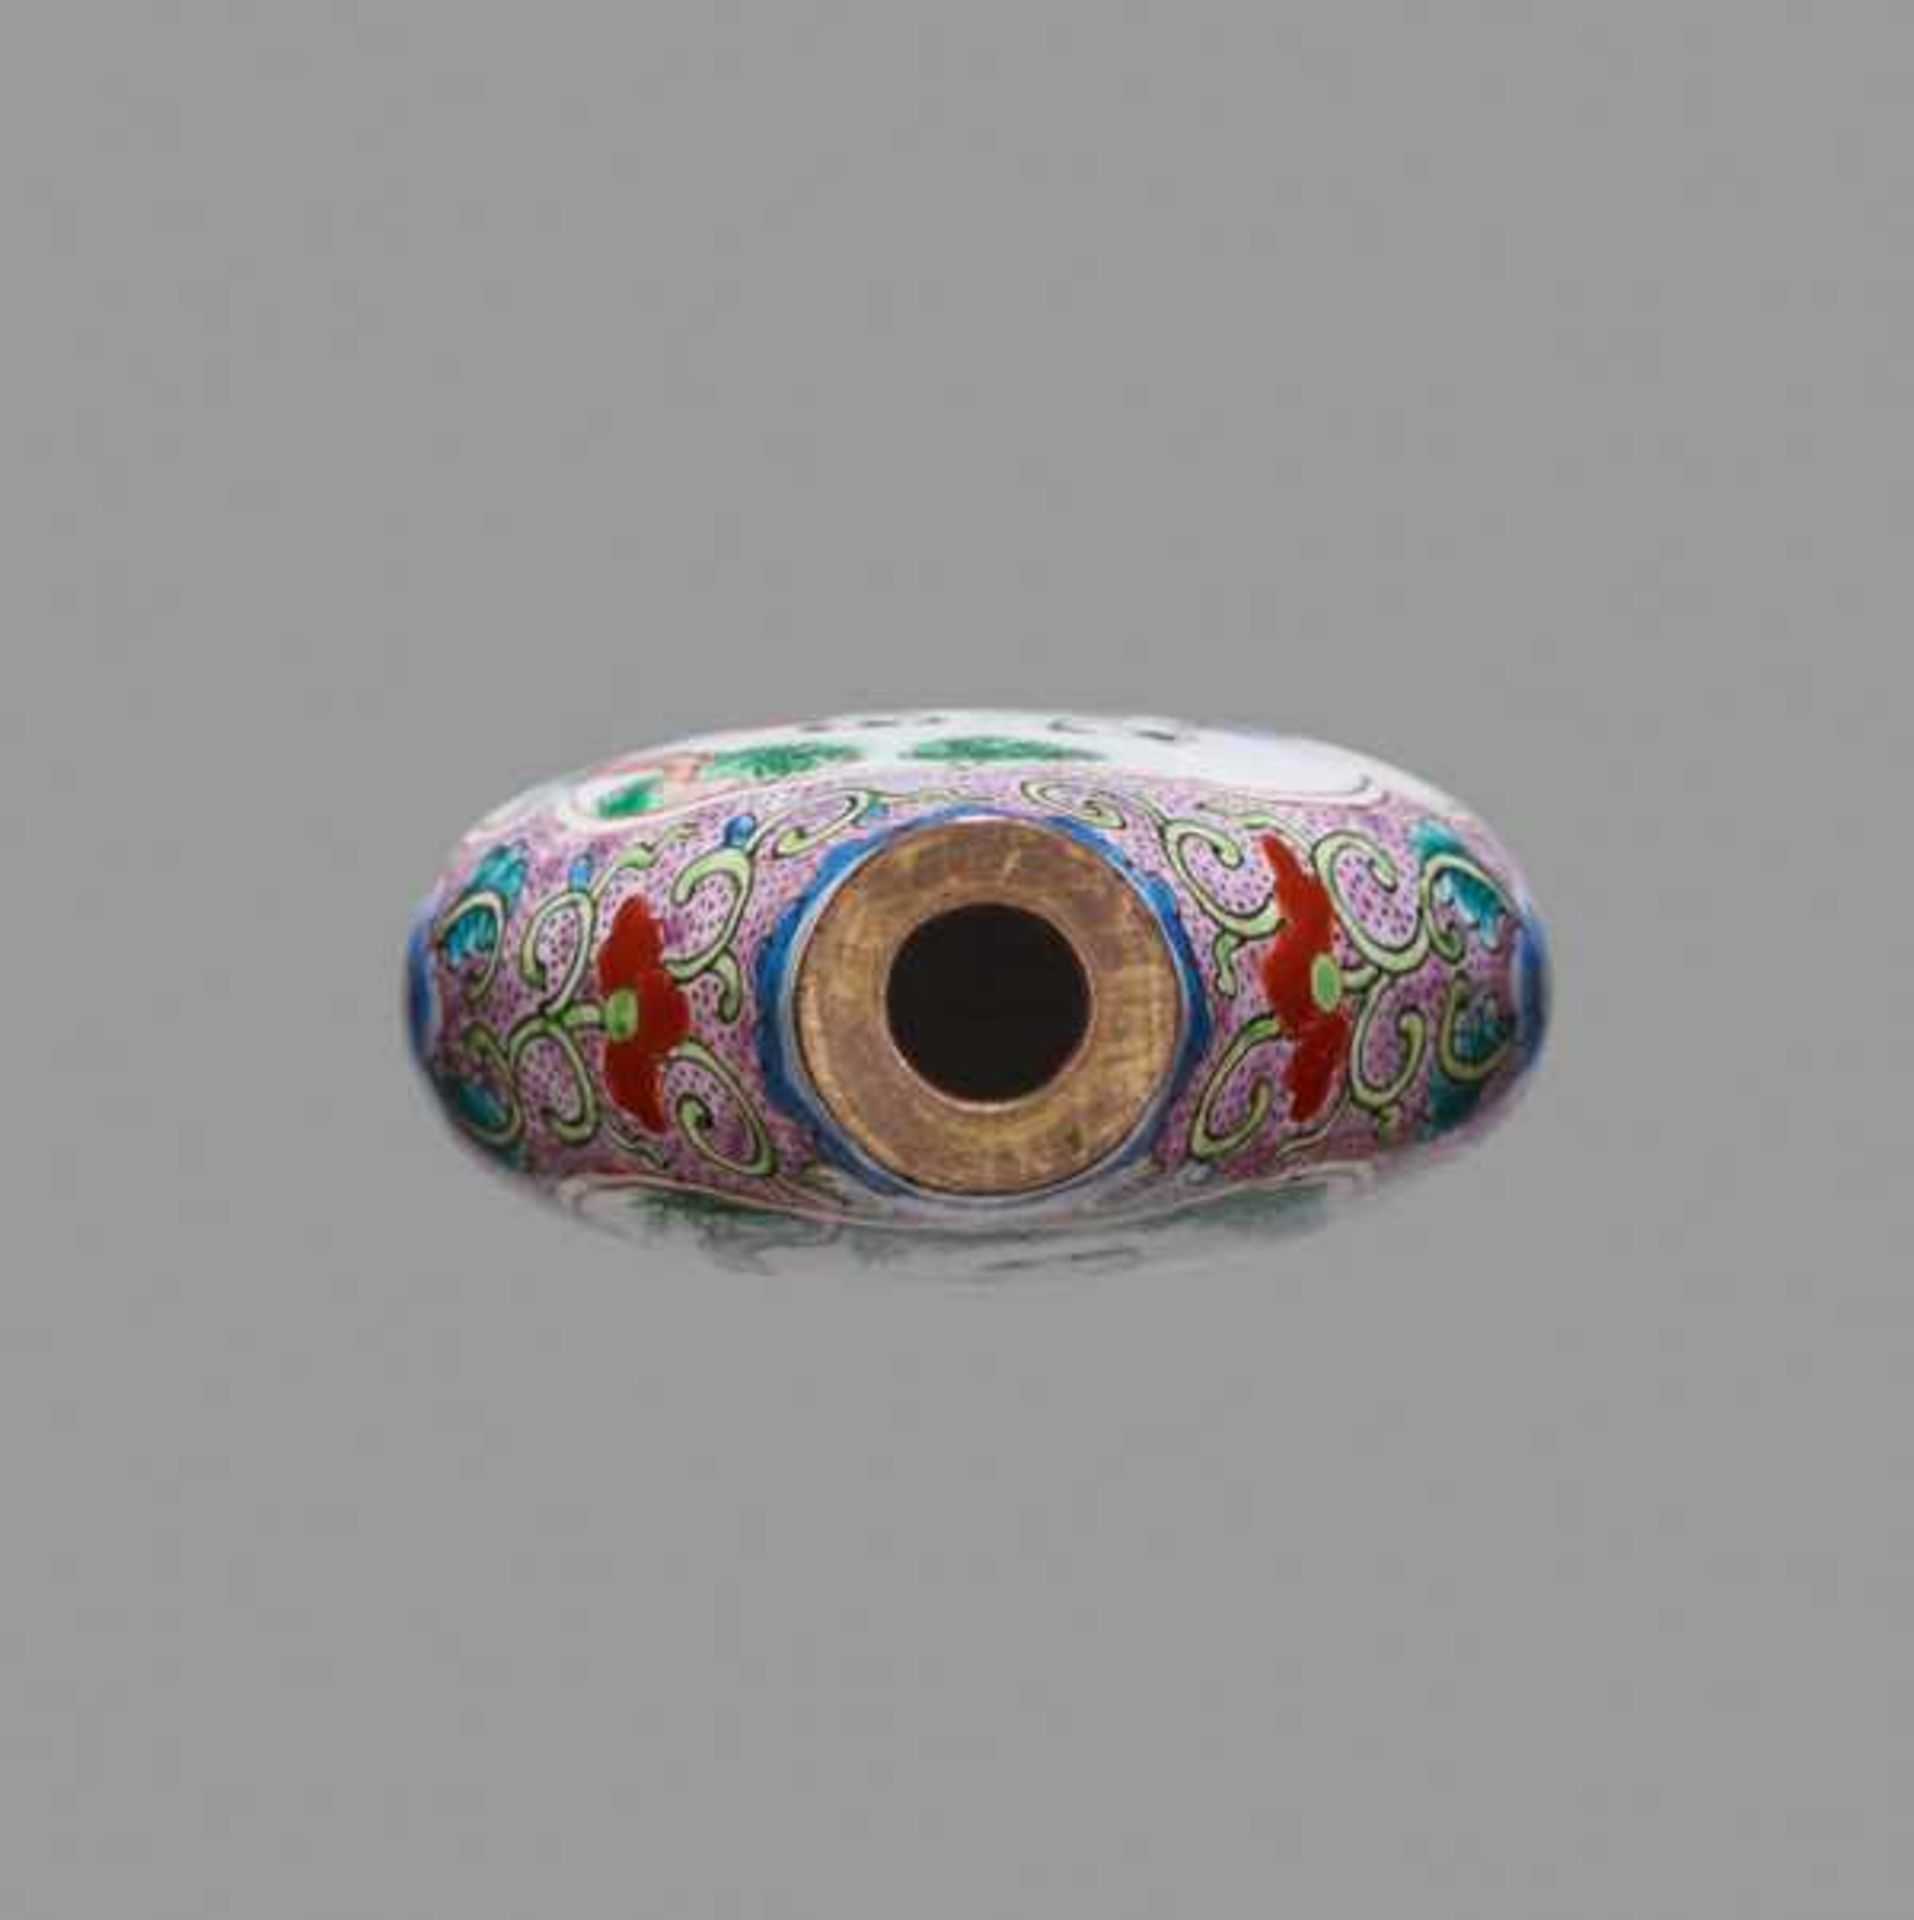 AN ENAMELED COPPER SNUFF BOTTLE, GUANGZHOU, 1850-1930 Copper with painted enamels. China, 1850-1930A - Bild 5 aus 6